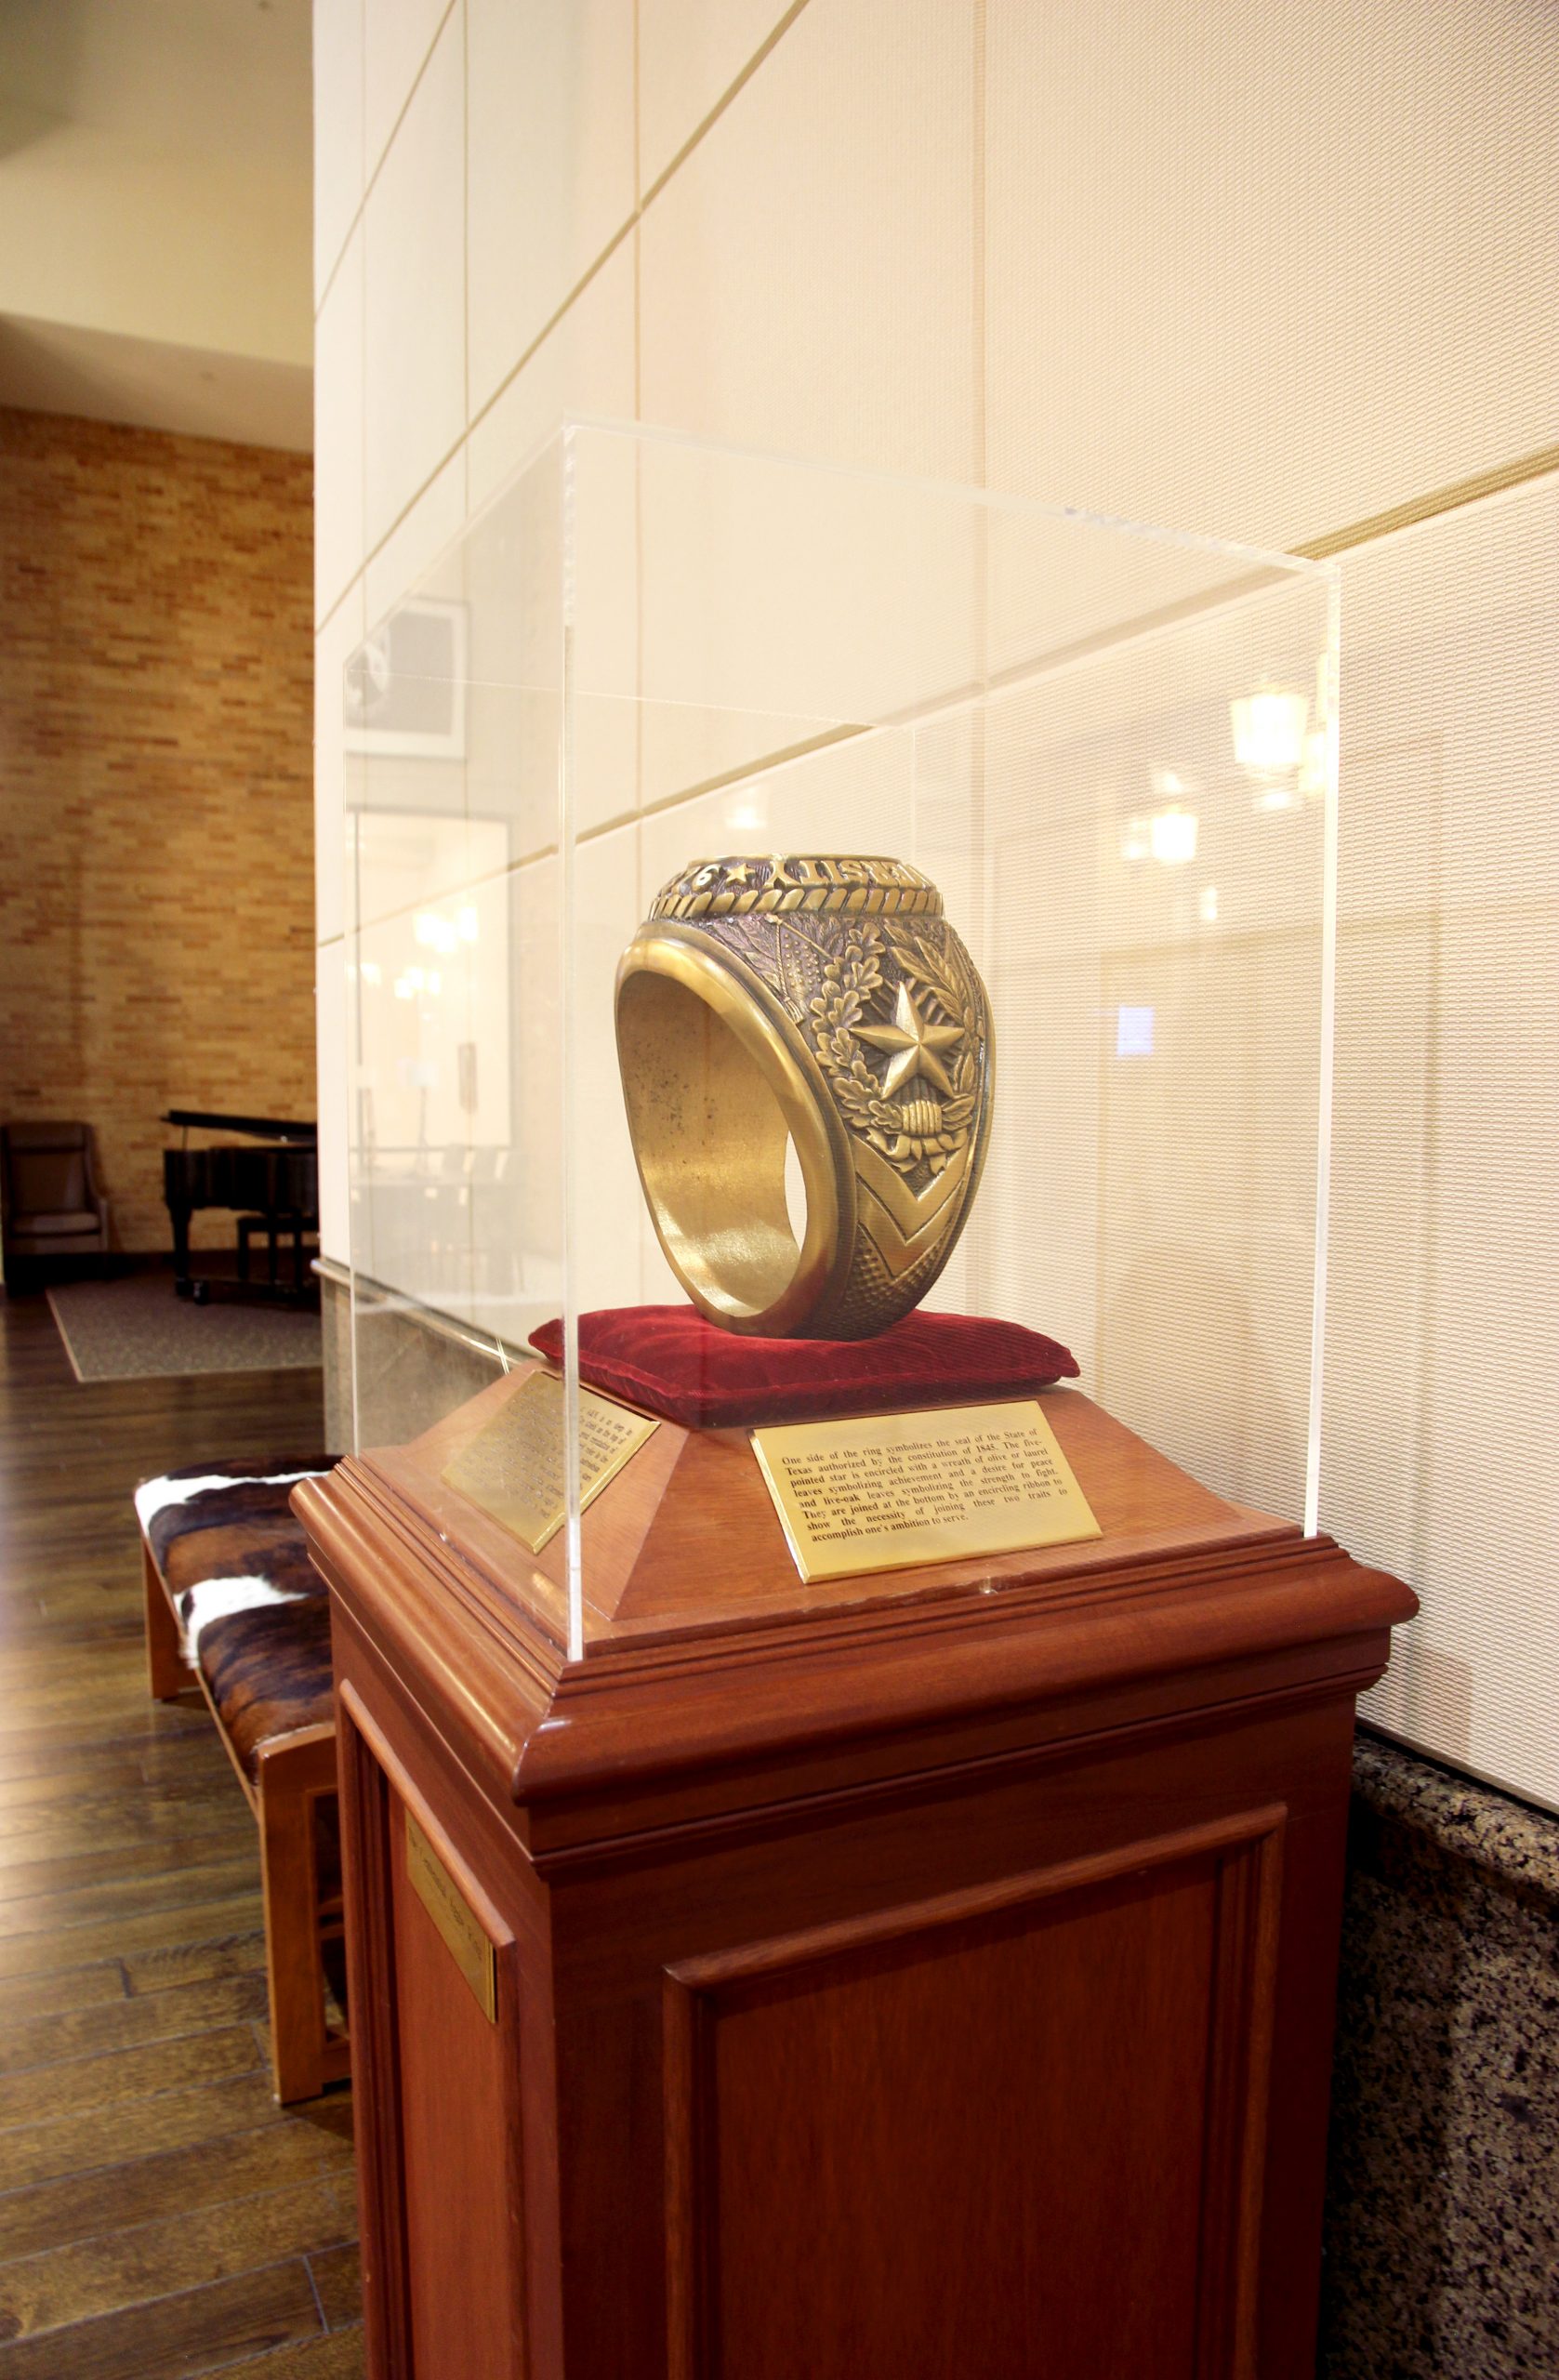 This Aggie Ring is in the "campus living room."